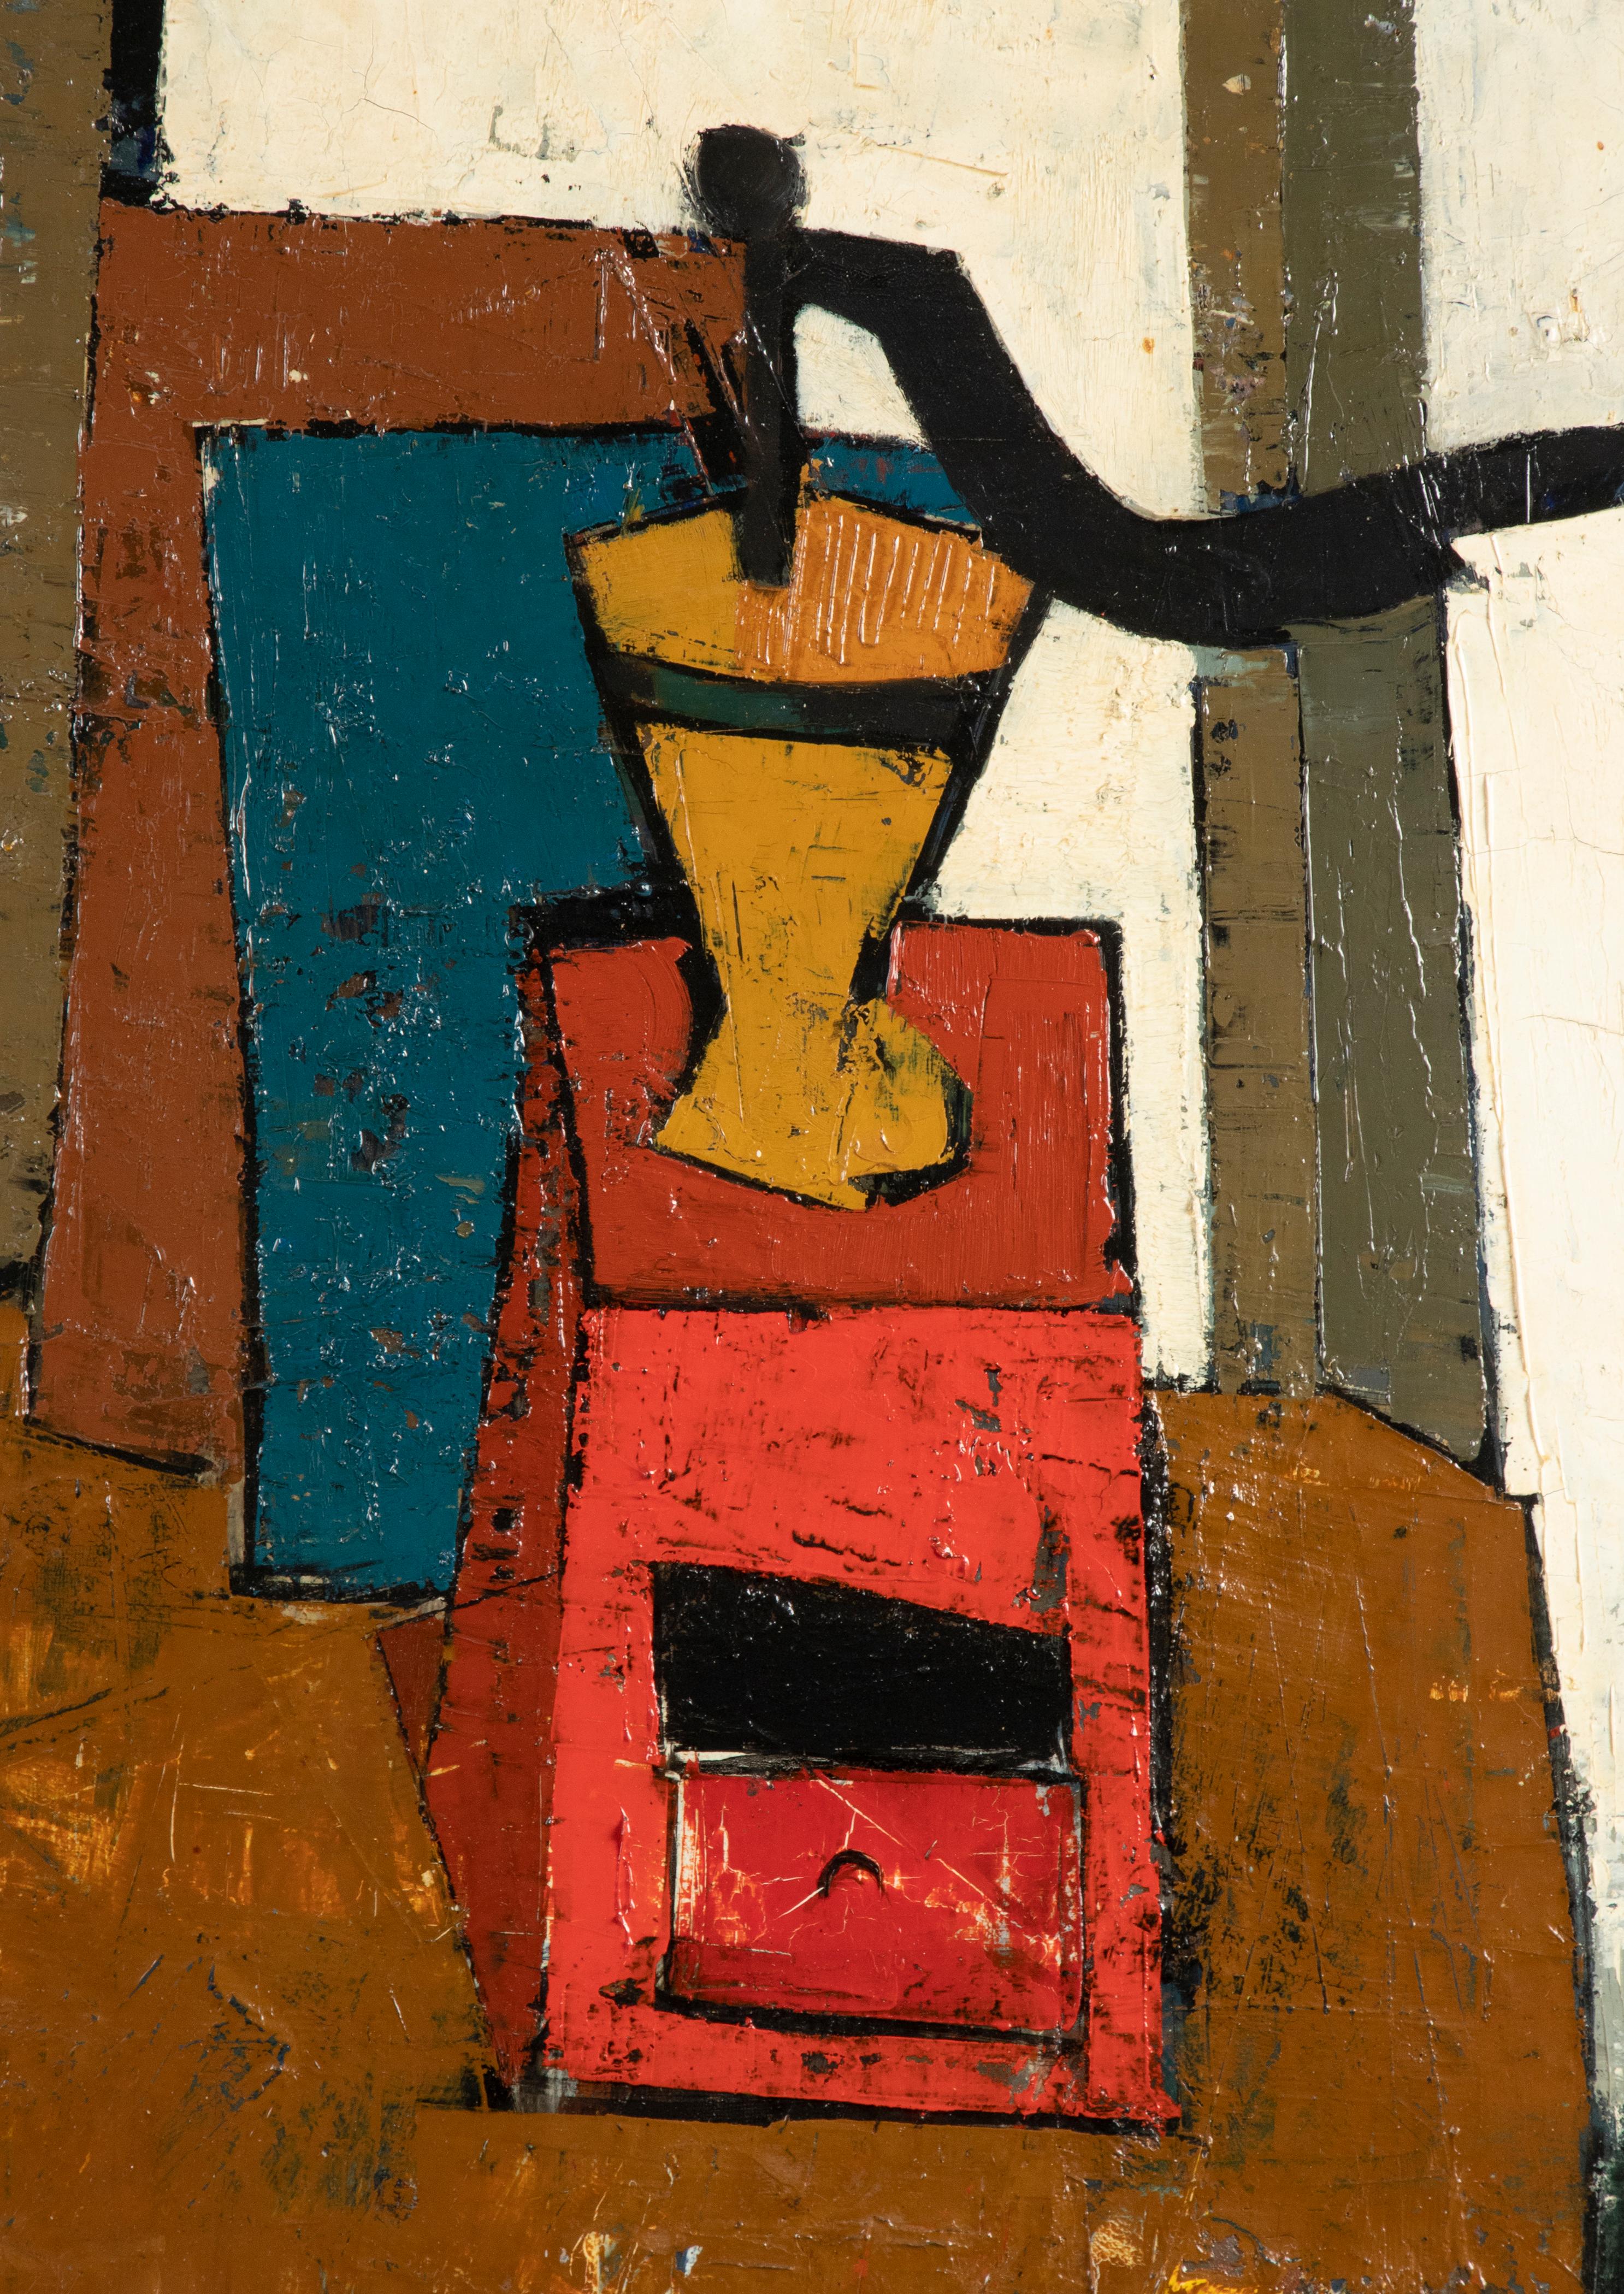 Hand-Painted Mid-Century Modern Painting Still Life with Chair by Willy Frissen